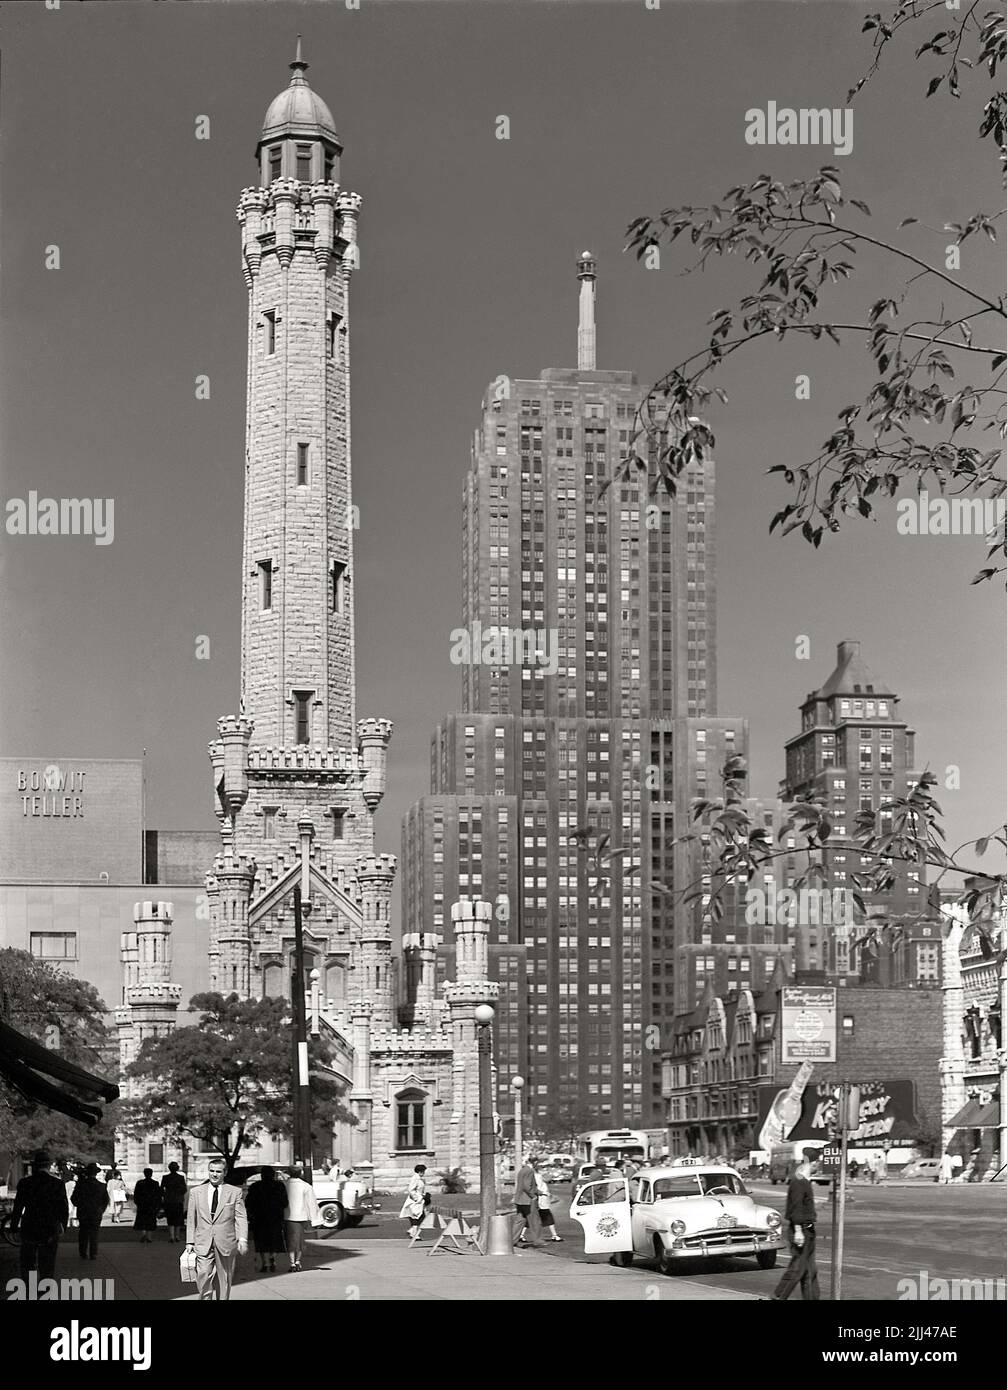 Chicago Old Water Tower and Palmolive-Playboy Building on Michigan Ave looking North, 1953.  Image from 4x5 inch negative. Stock Photo